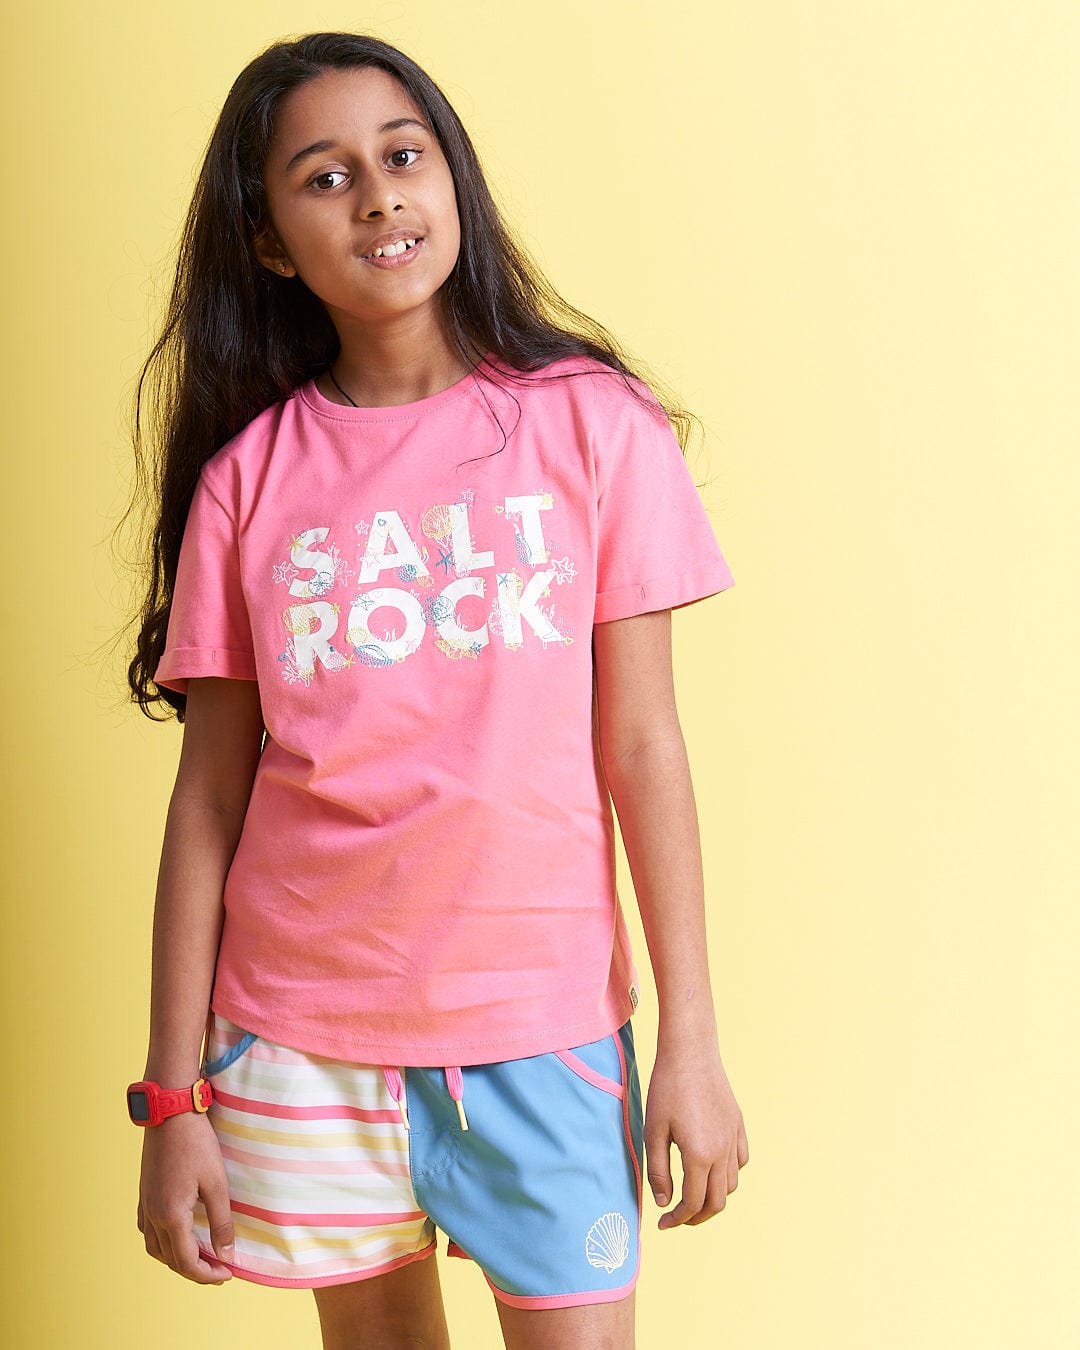 A girl in a Seabed - Kids Short Sleeve T-Shirt - Pink from Saltrock.